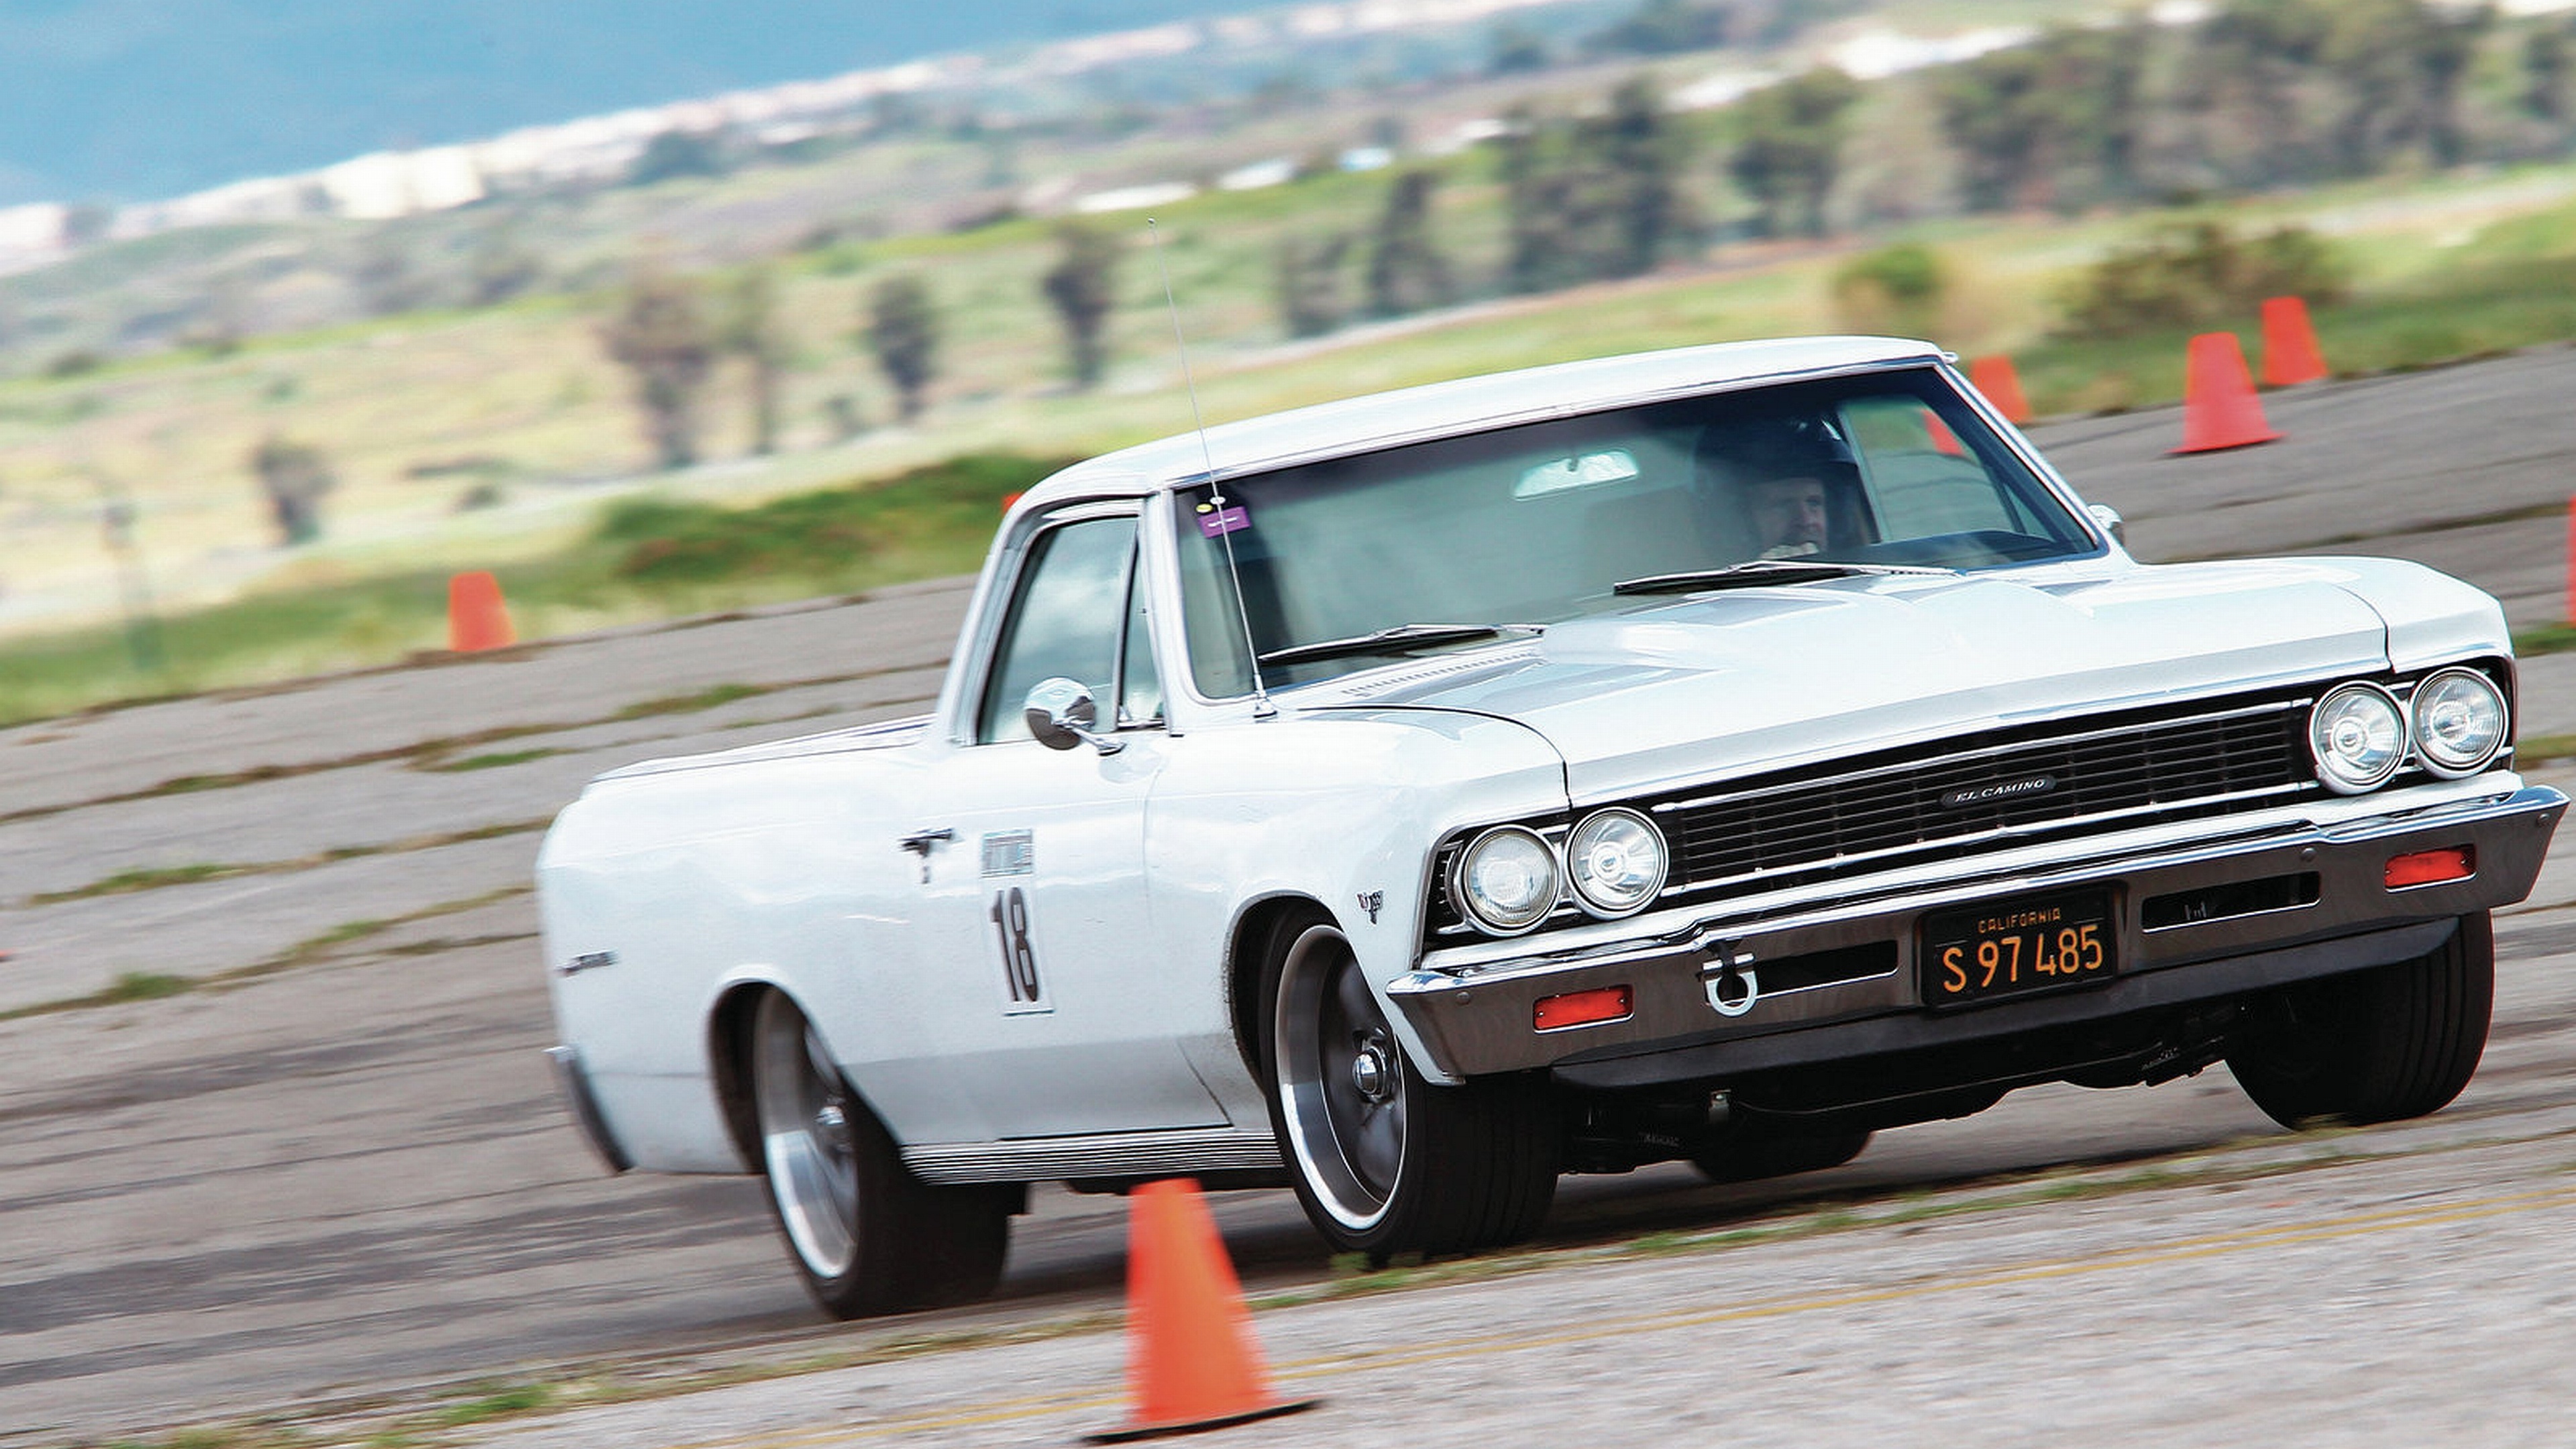 Autocross: Chevrolet El Camino, A coupe utility vehicle, A tuned version of an American pickup. 3840x2160 4K Wallpaper.